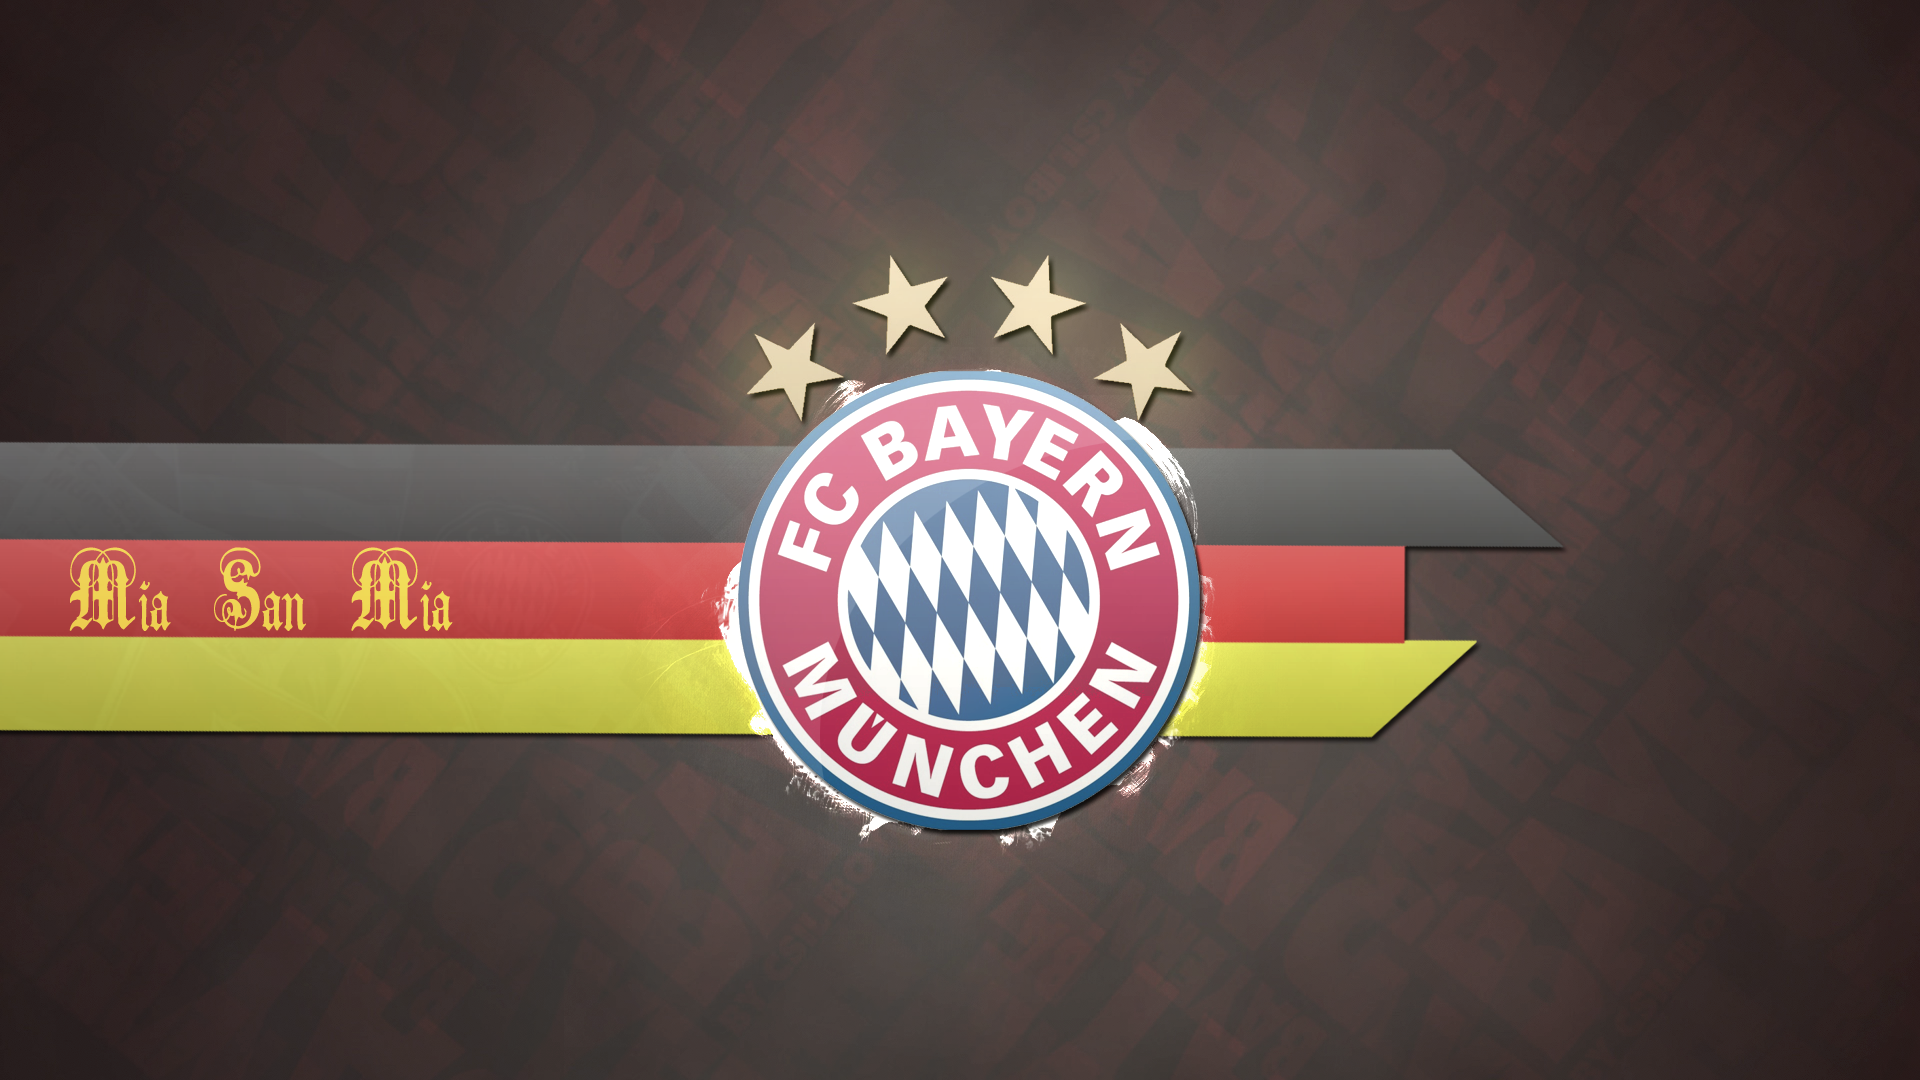 Fc Bayern Munchen Wallpaper HD Pictures In High Definition Or